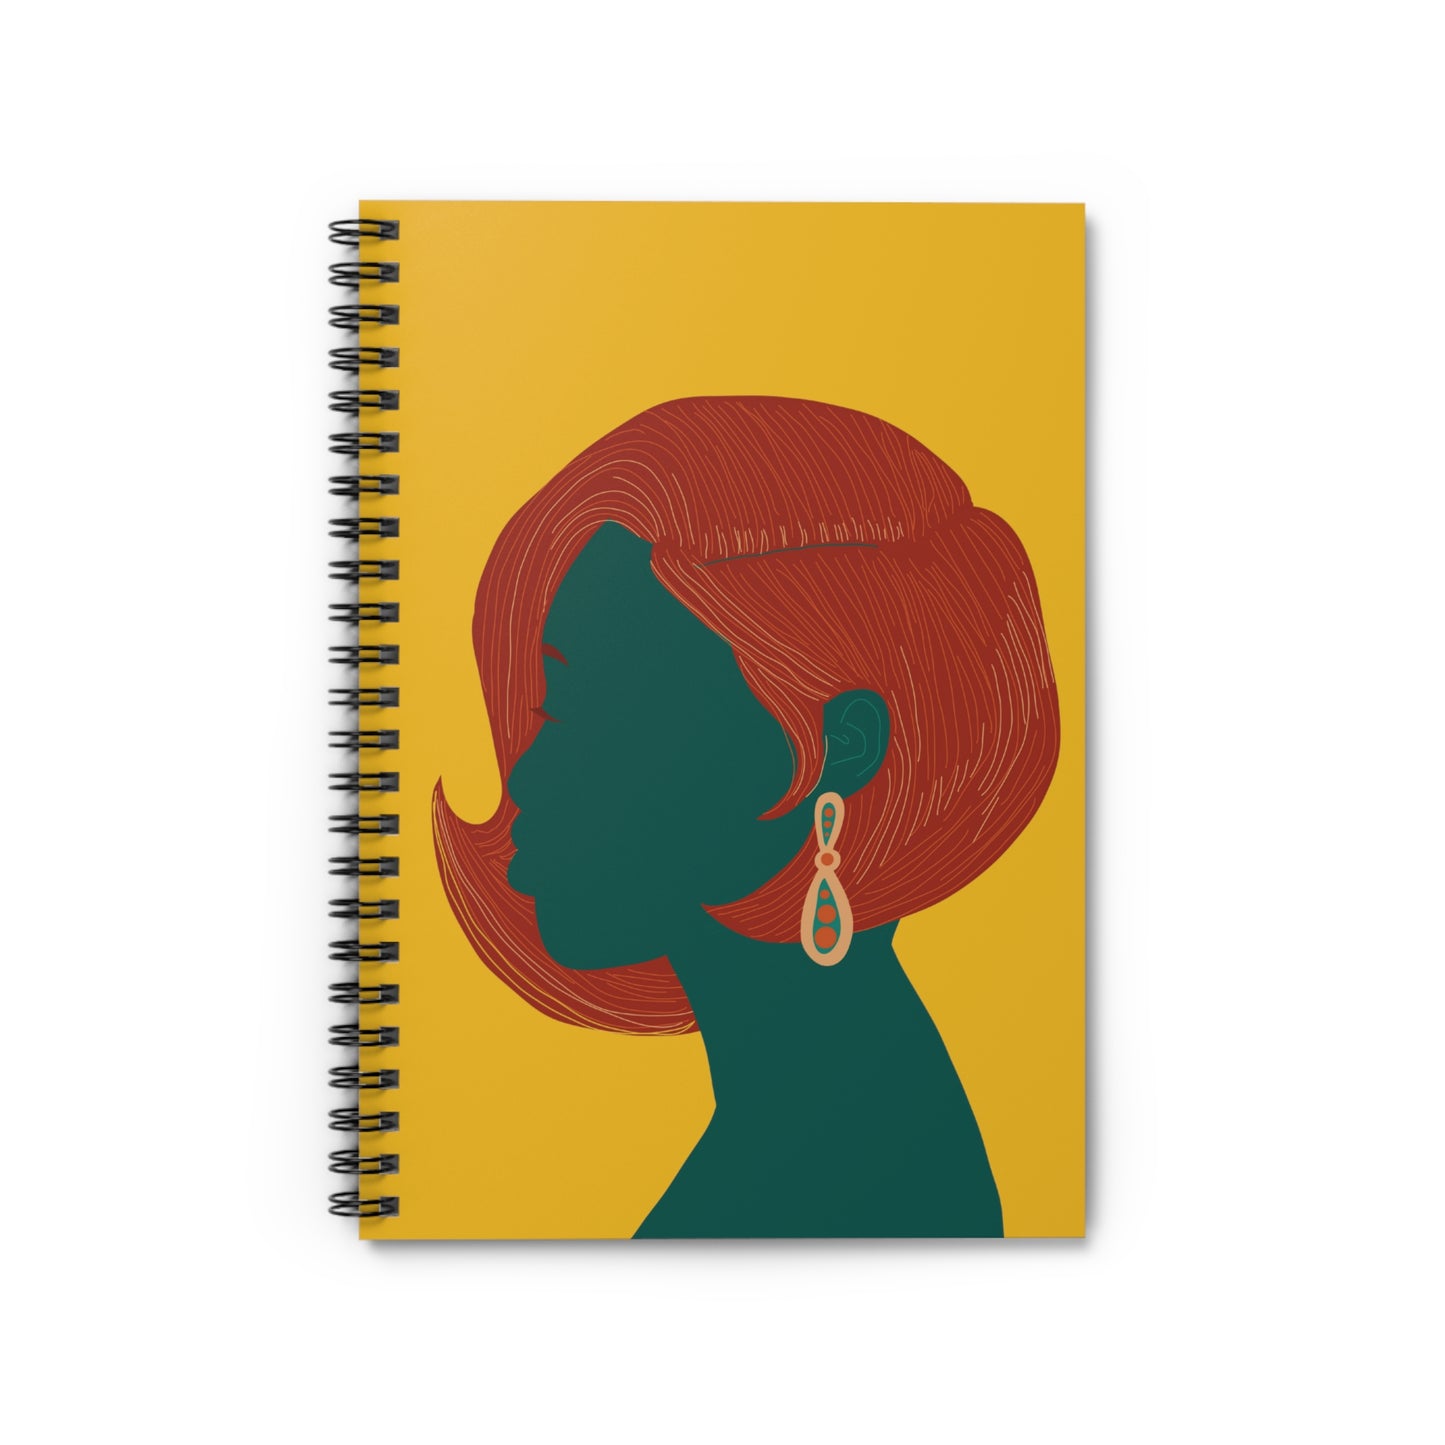 Swoop Bob Spiral Notebook - Ruled Line "Don't Touch My Hair Collection"